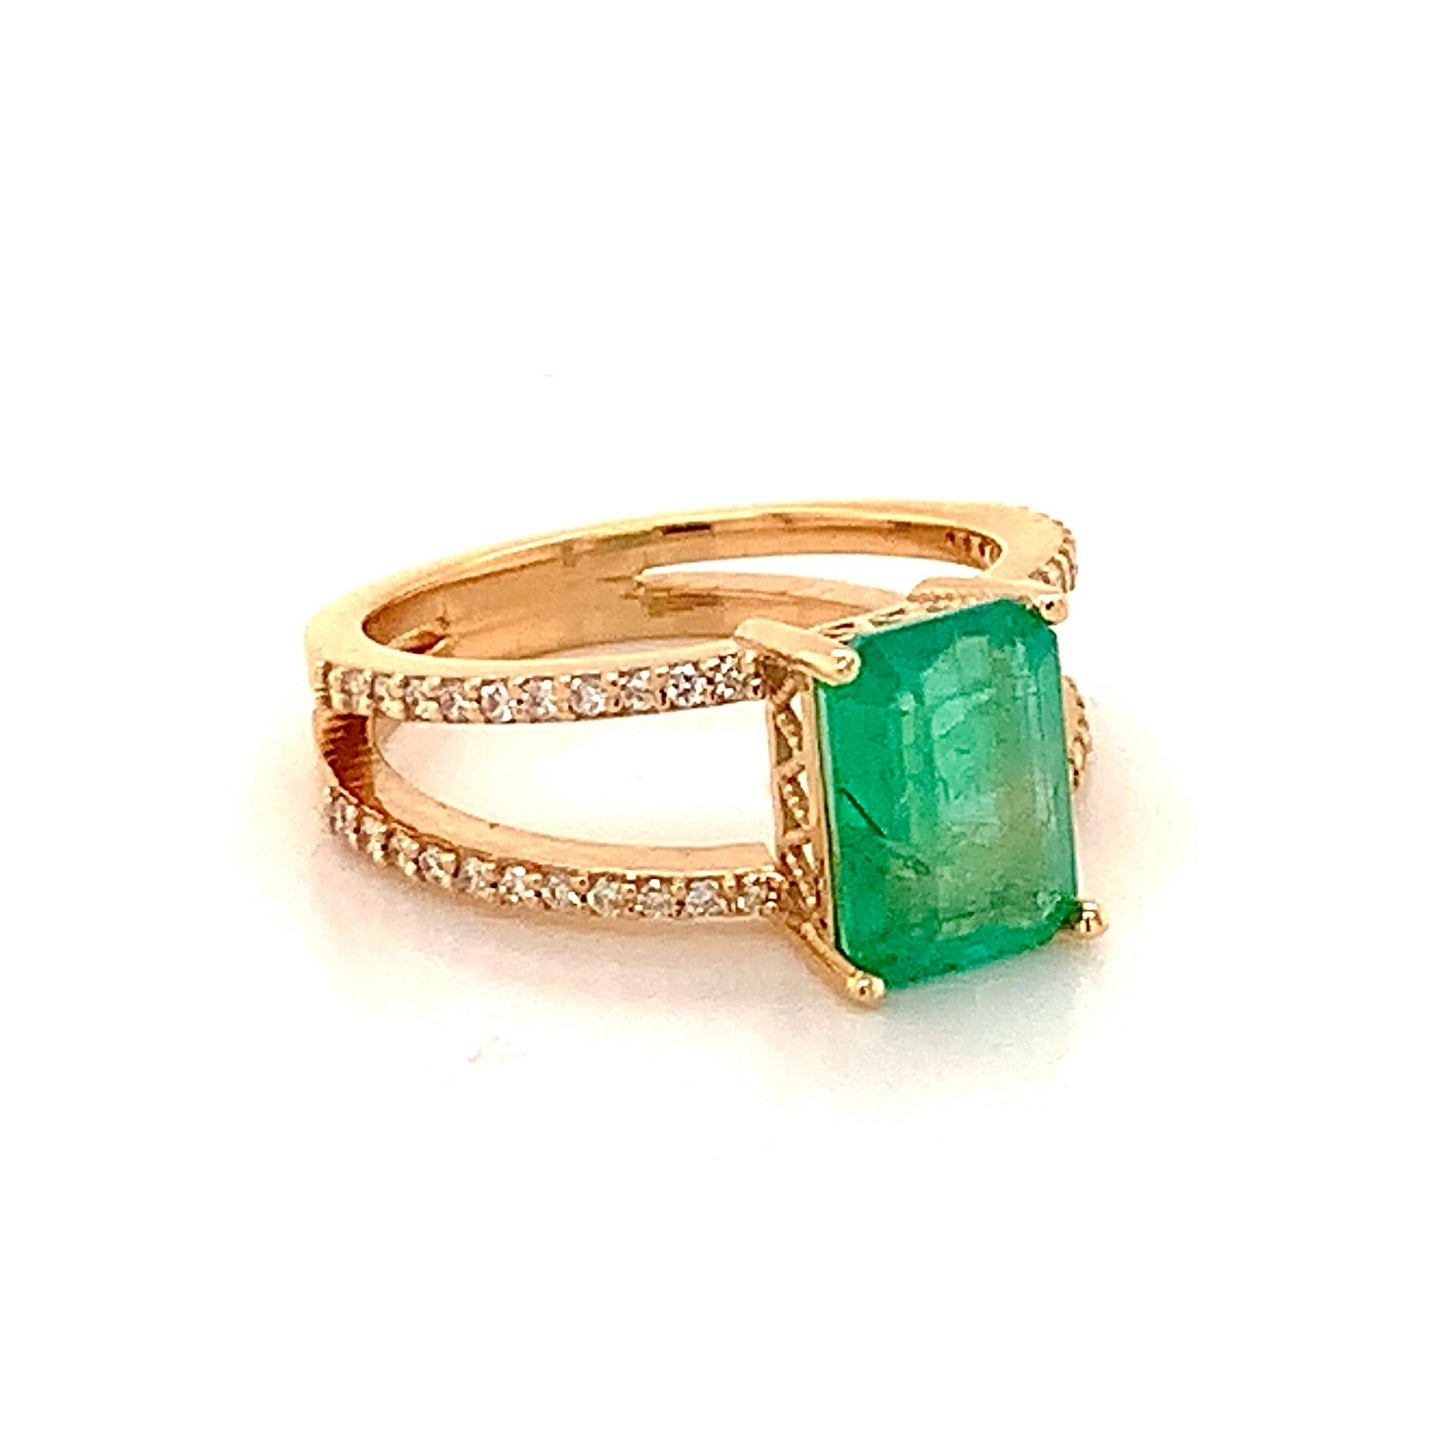 Natural Emerald Diamond Ring 14k Gold 2.32 TCW Size 7 Certified $5,950 111874